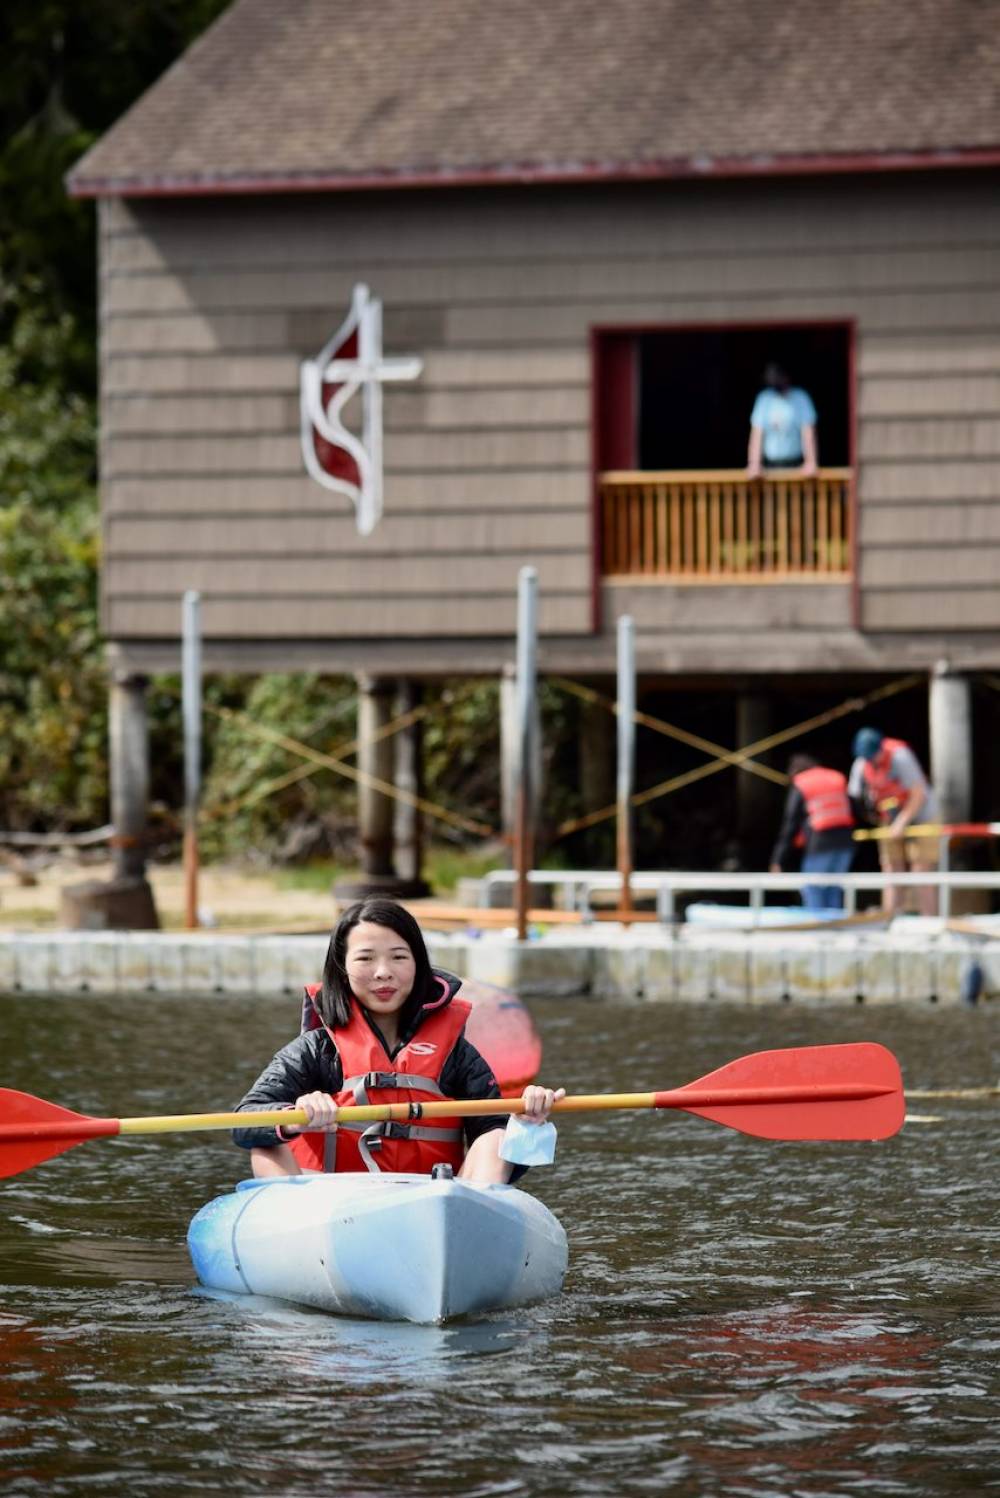 TOP OREGON RESIDENT CAMP: Camp Magruder is a Top Resident Summer Camp located in Rockaway Beach Oregon offering many fun and enriching Resident and other camp programs. 